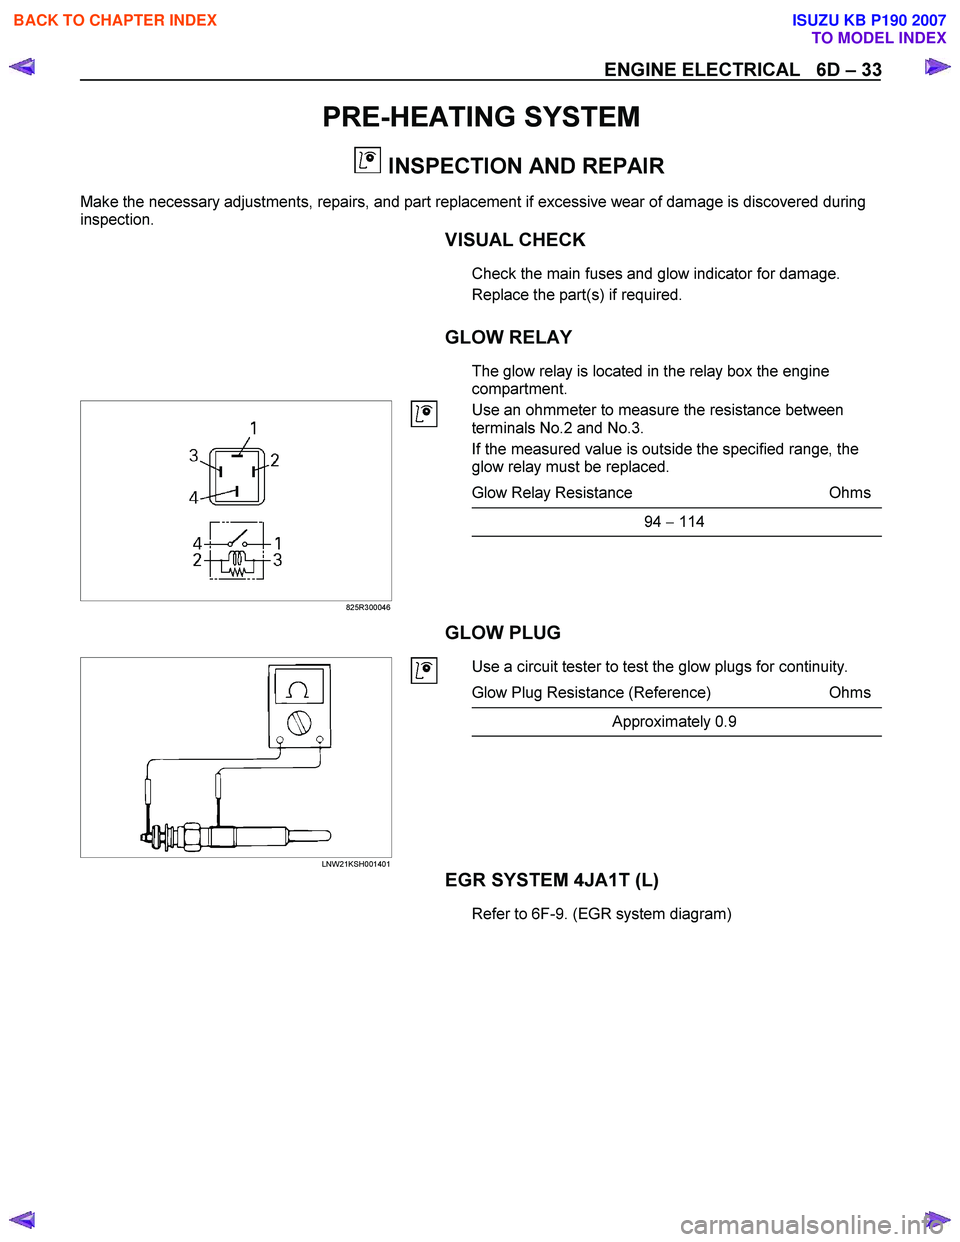 ISUZU KB P190 2007  Workshop Repair Manual ENGINE ELECTRICAL   6D – 33 
PRE-HEATING SYSTEM 
  INSPECTION AND REPAIR 
Make the necessary adjustments, repairs, and part replacement if excessive wear of damage is discovered during  
inspection.